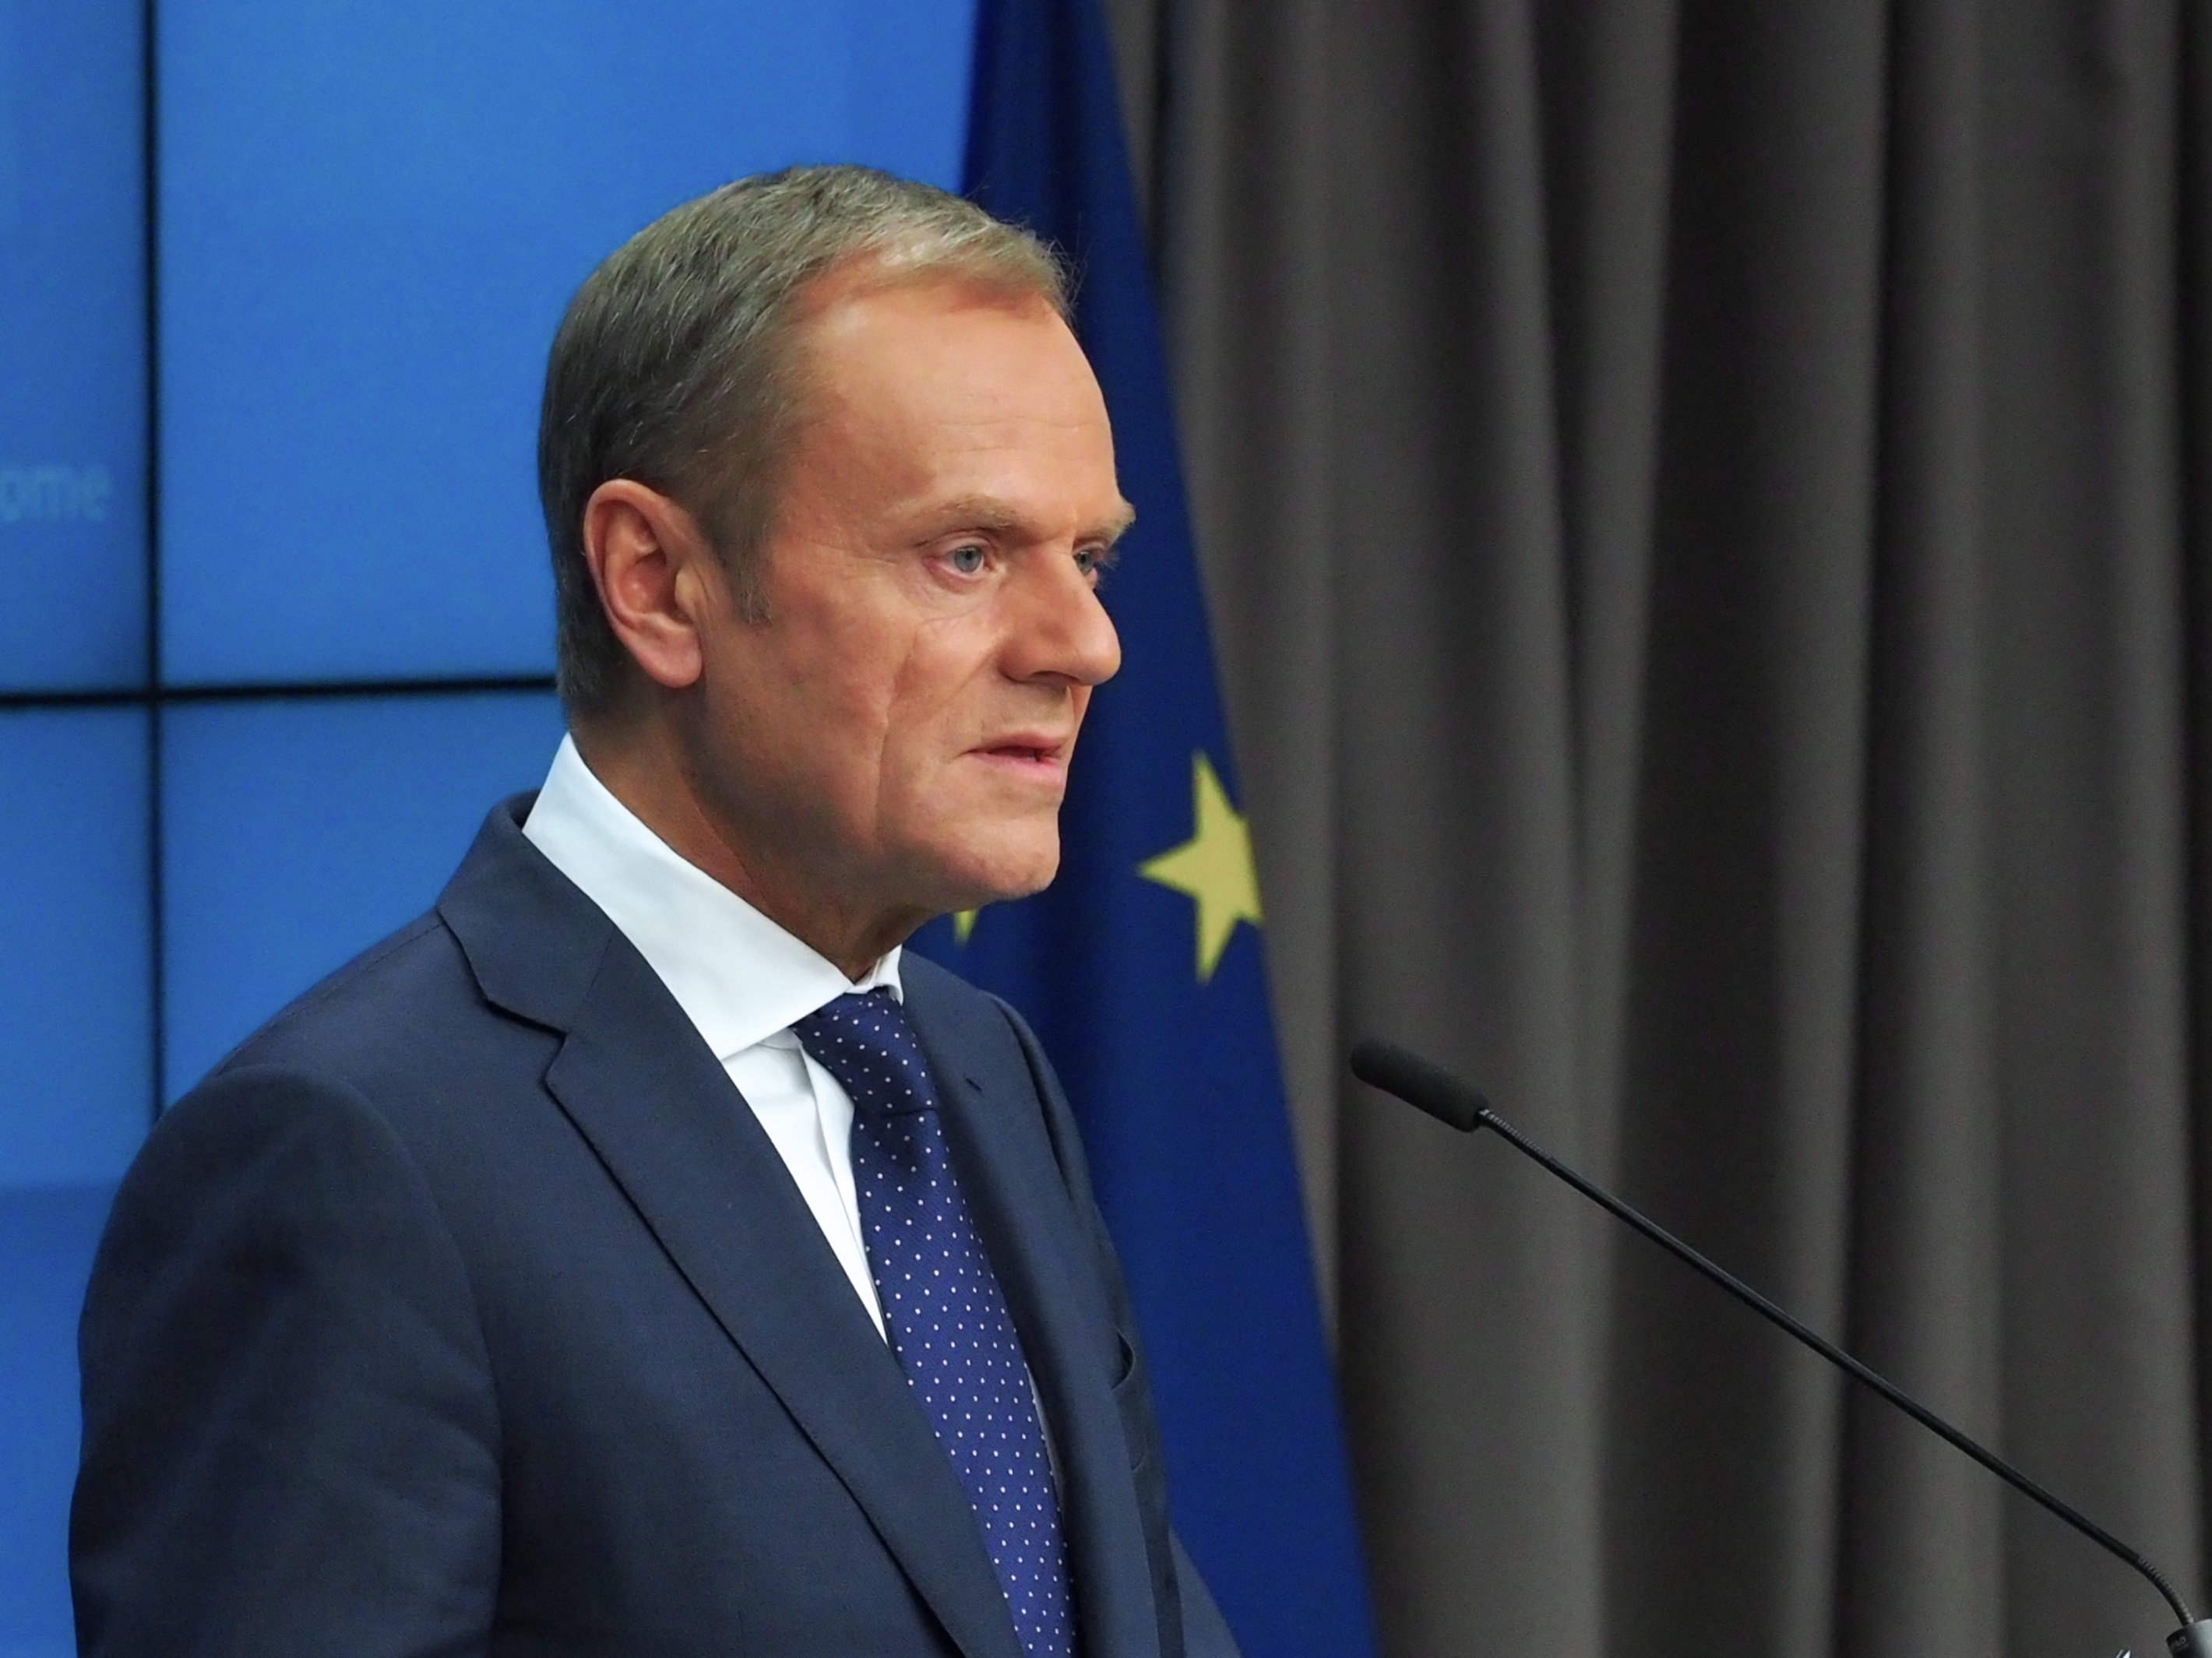 The President of the European Council Donald Tusk